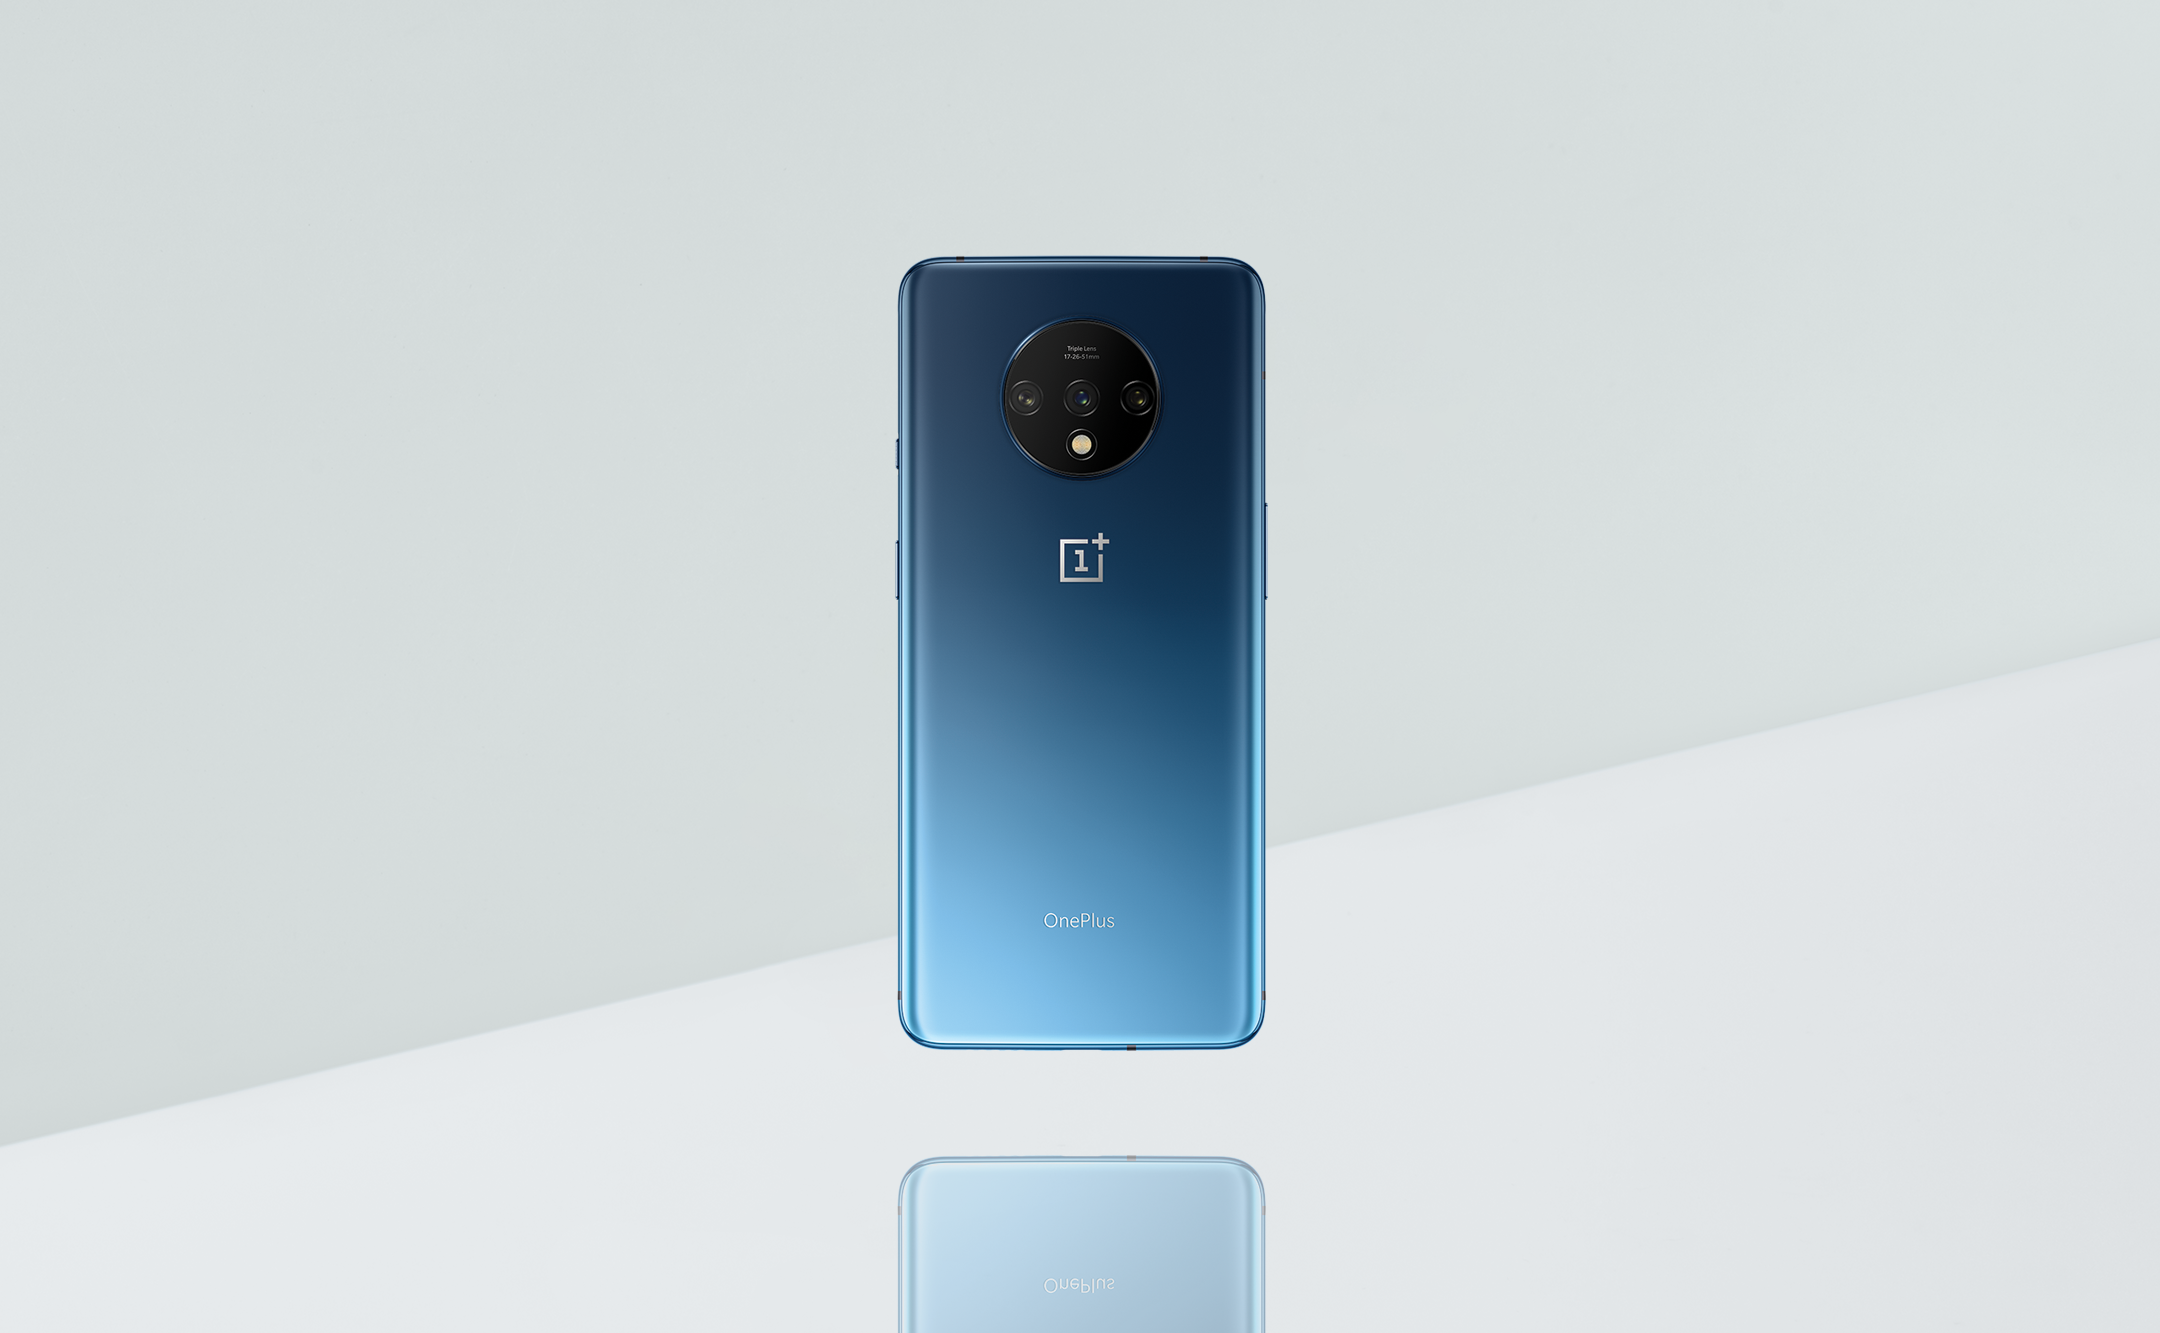 What will the OnePlus 7T look like?